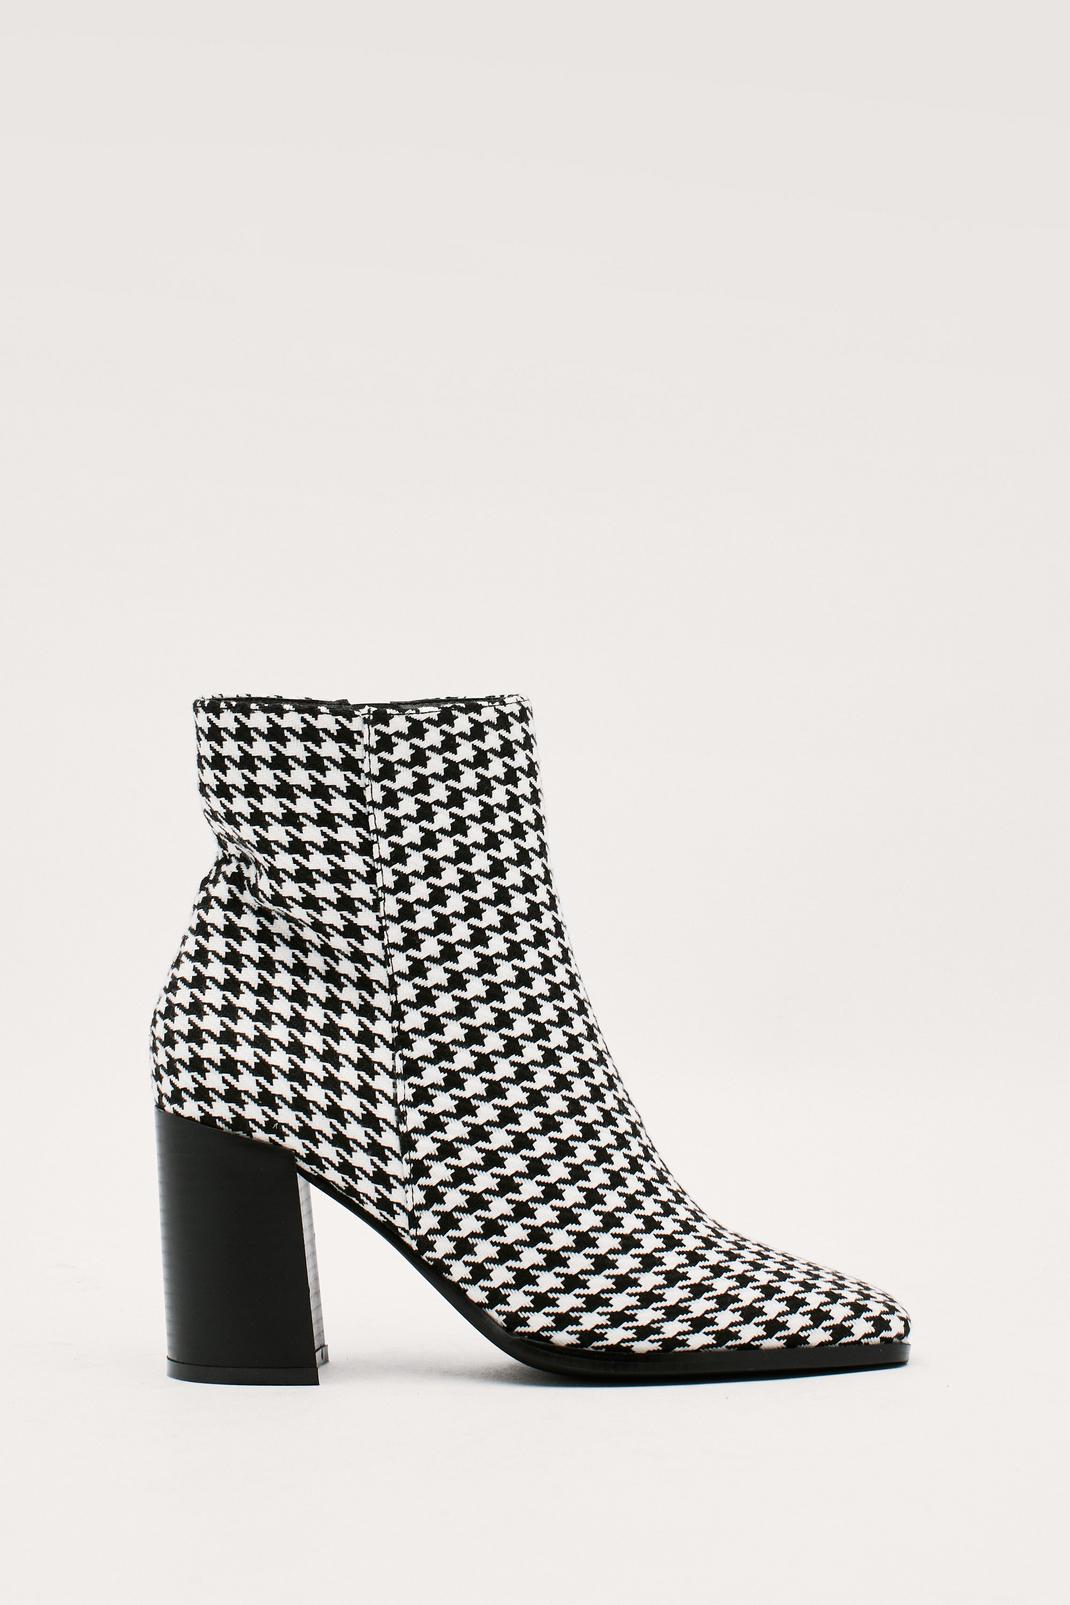 Black_white Houndstooth Square Toe Ankle Boots image number 1